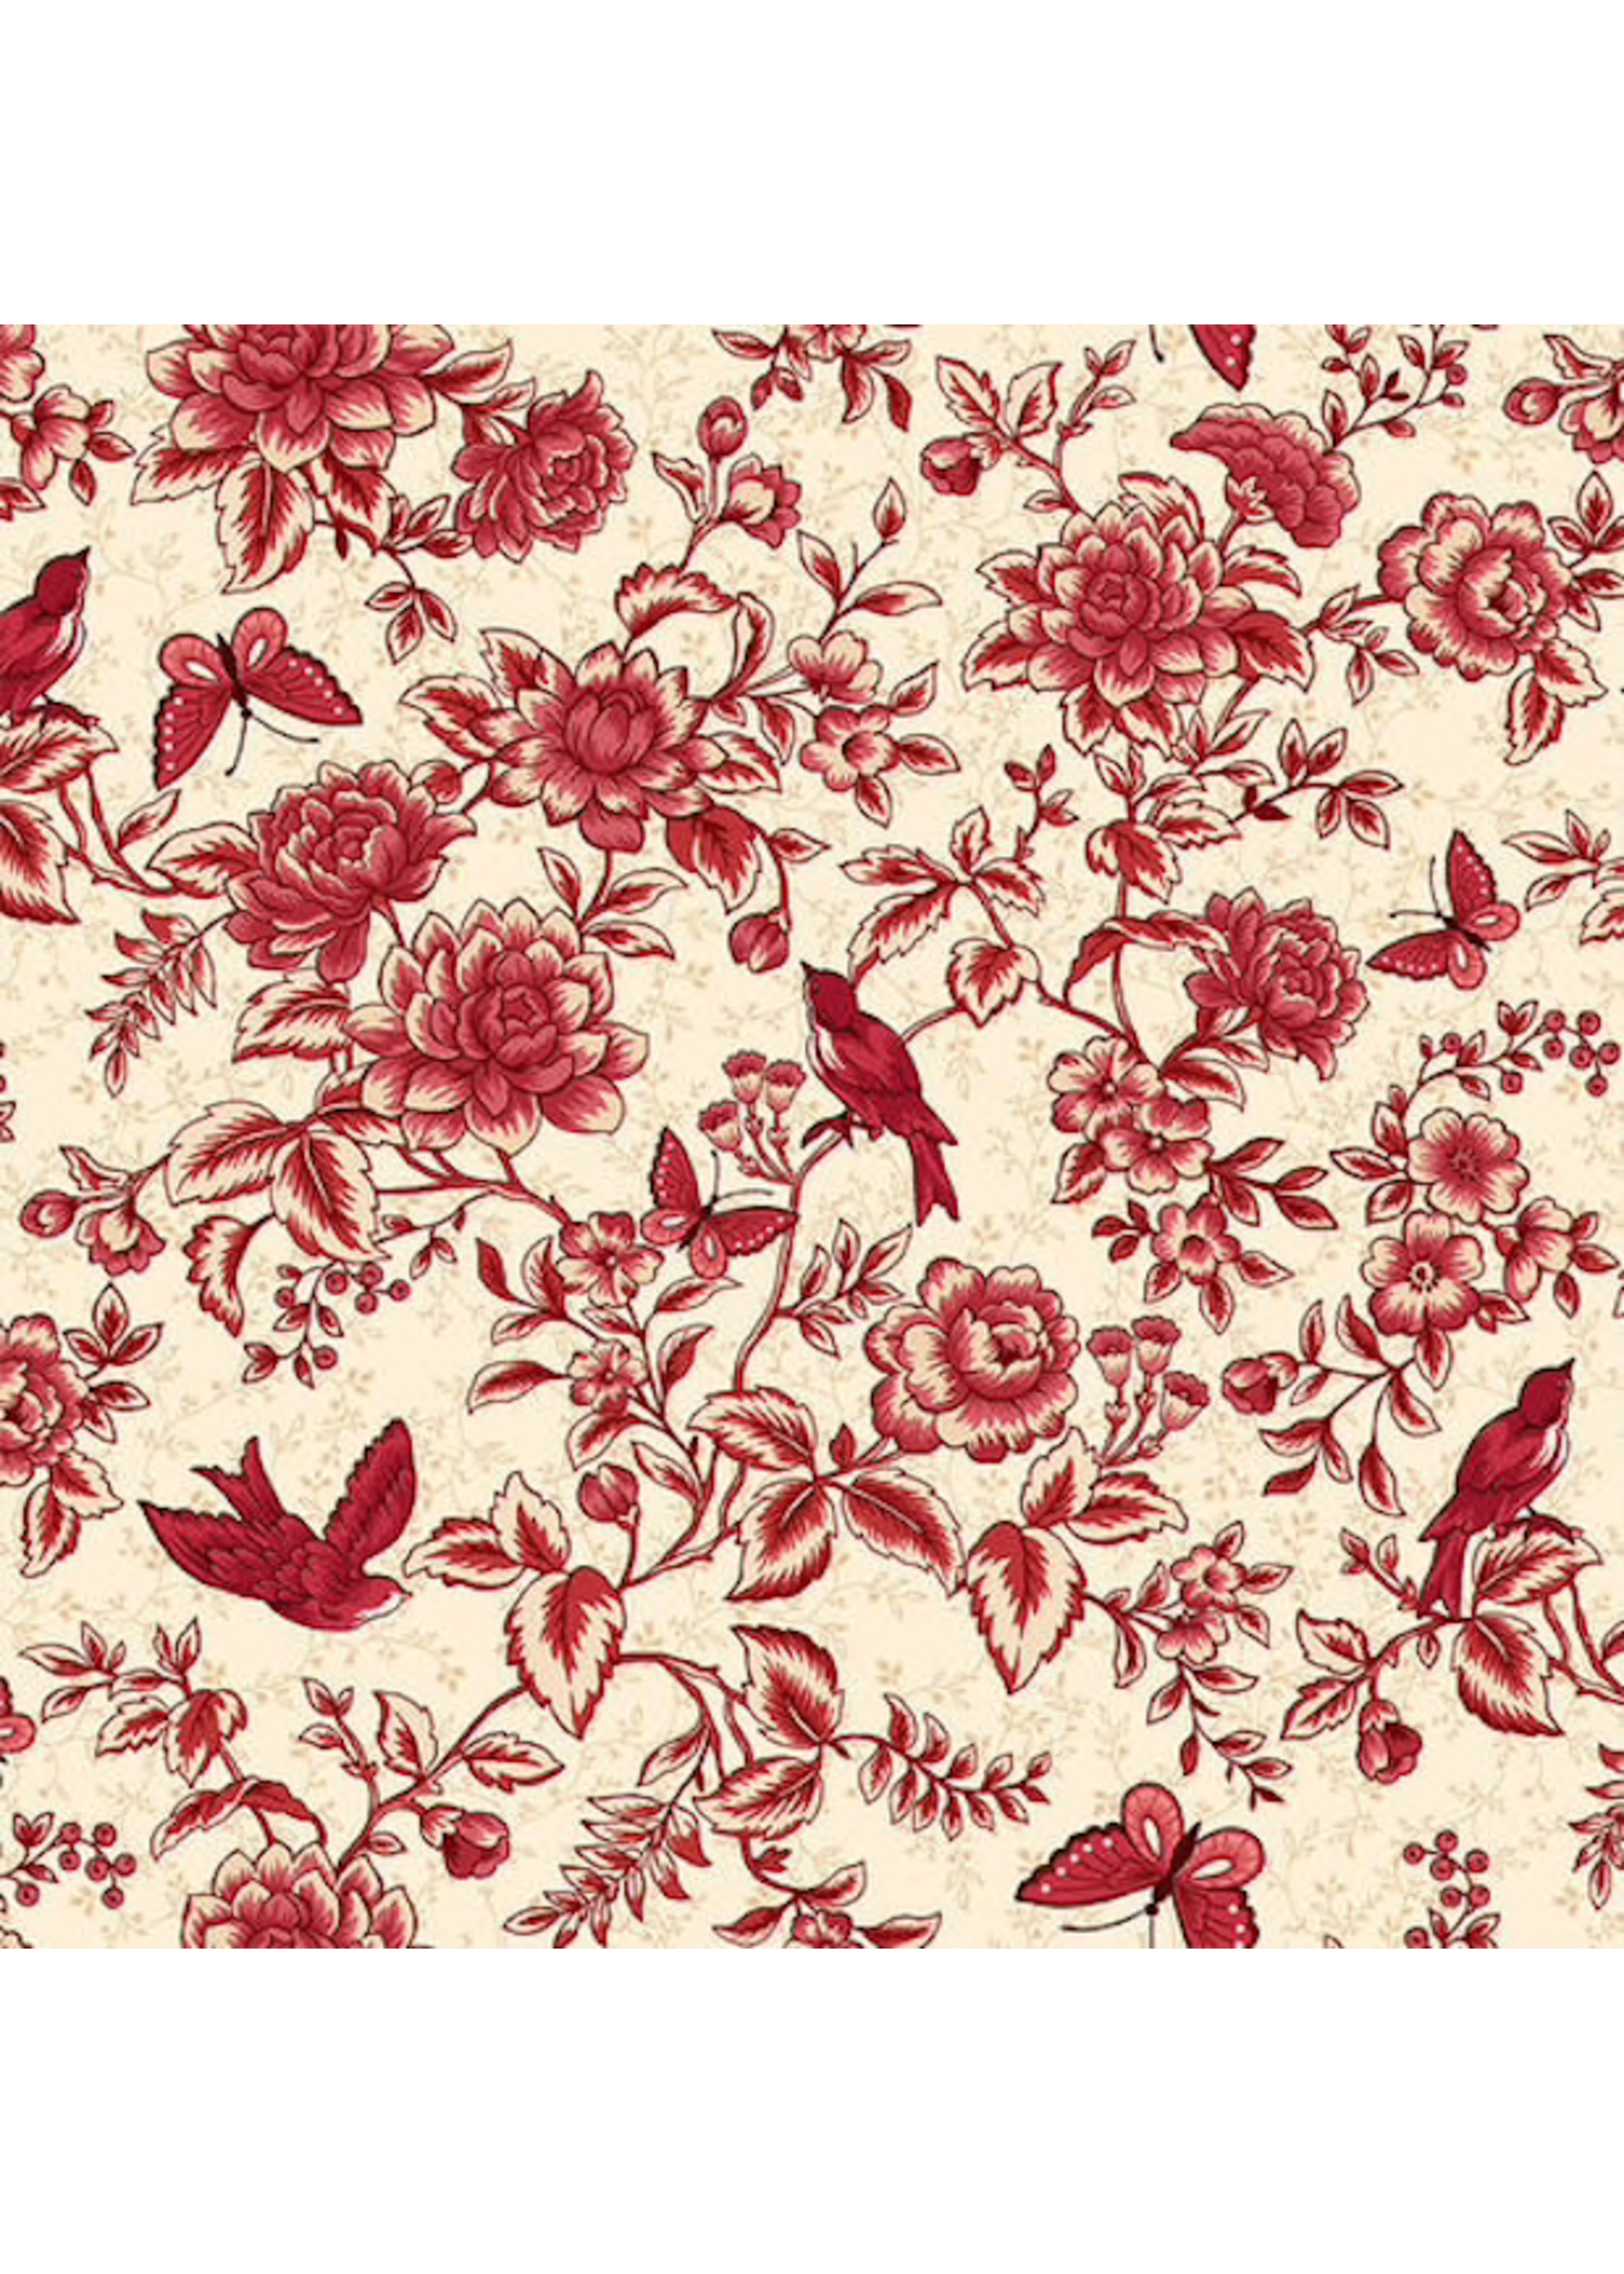 Henry Glass Fabrics Tarrytown - Floral Toile - Red